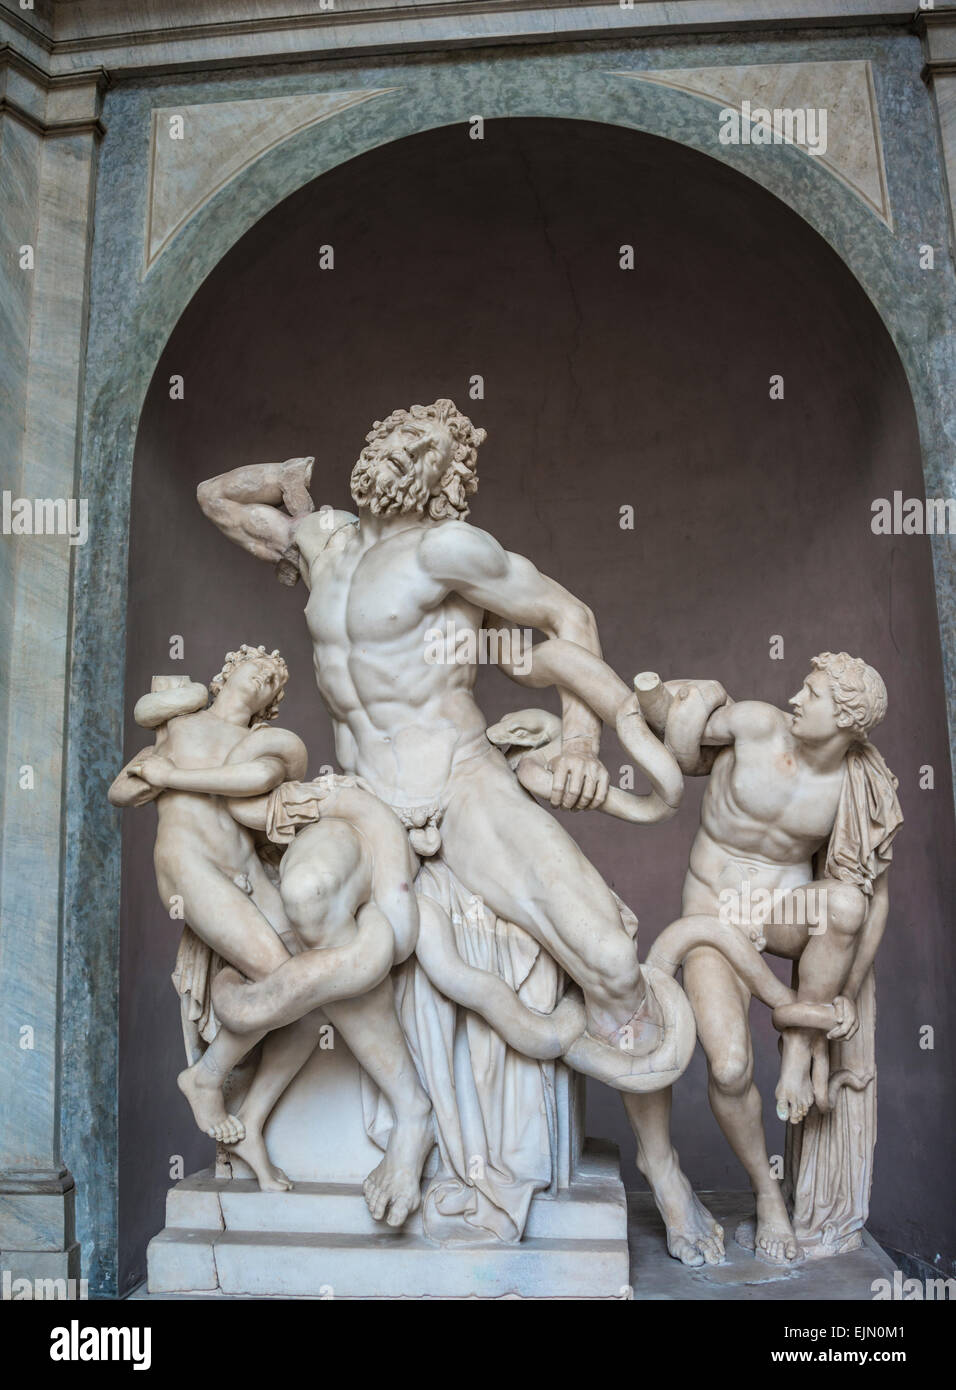 Laocoön and His Sons, Hagesandros, Polydorus and Athanadoros from Rhodes, Cortile Ottagono, Vatican Museums, Vatican, Italy Stock Photo